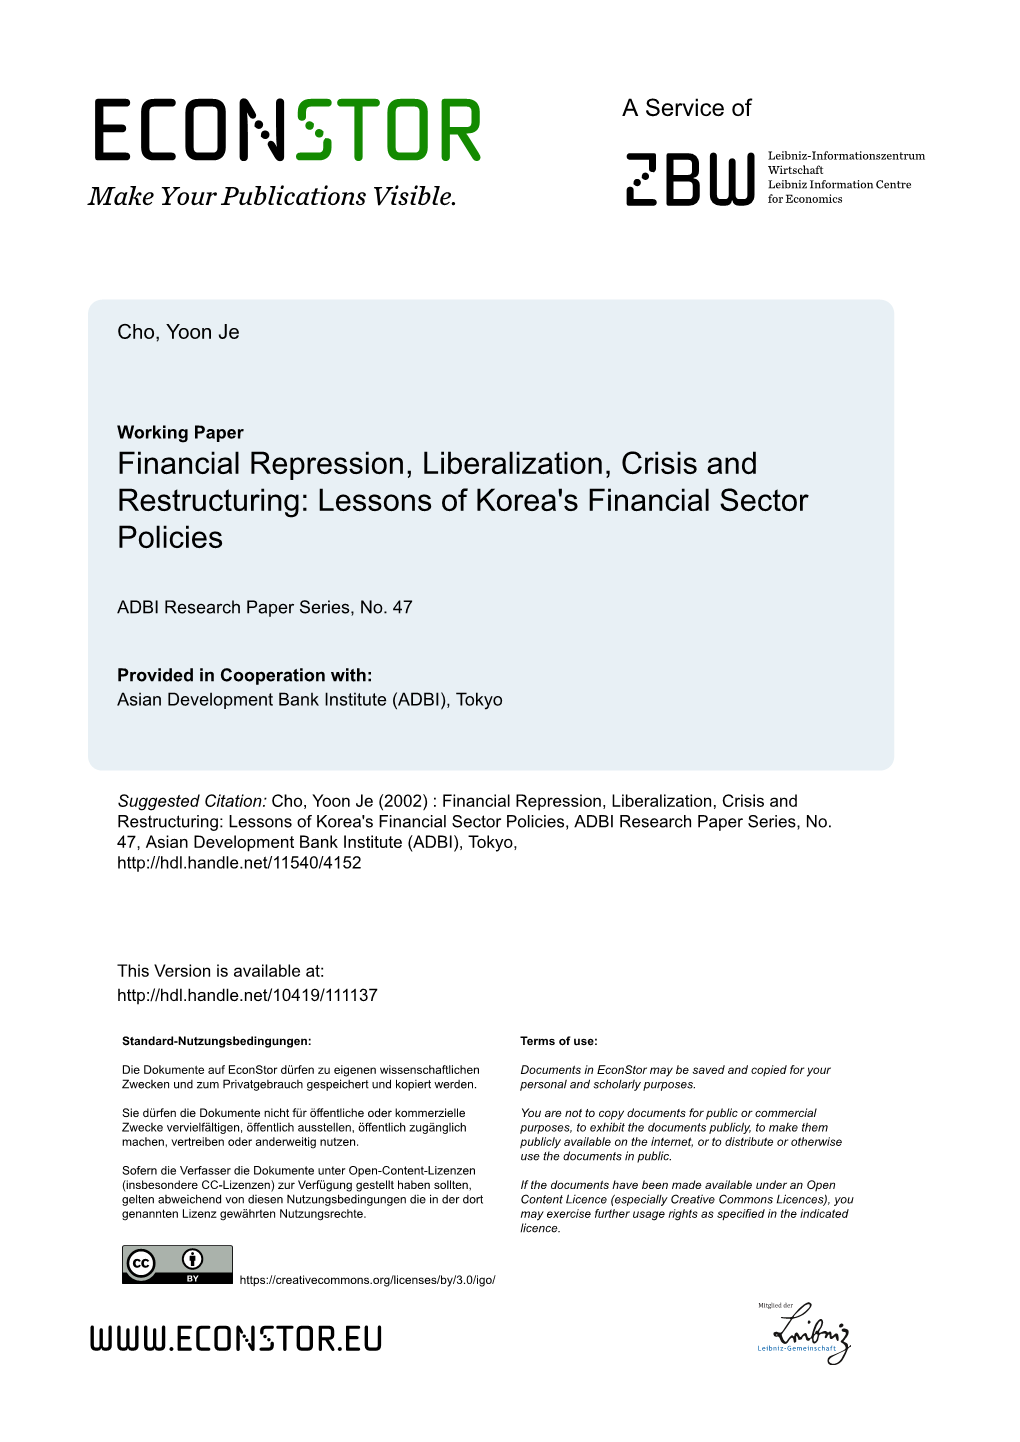 Financial Repression, Liberalization, Crisis and Restructuring: Lessons of Korea's Financial Sector Policies